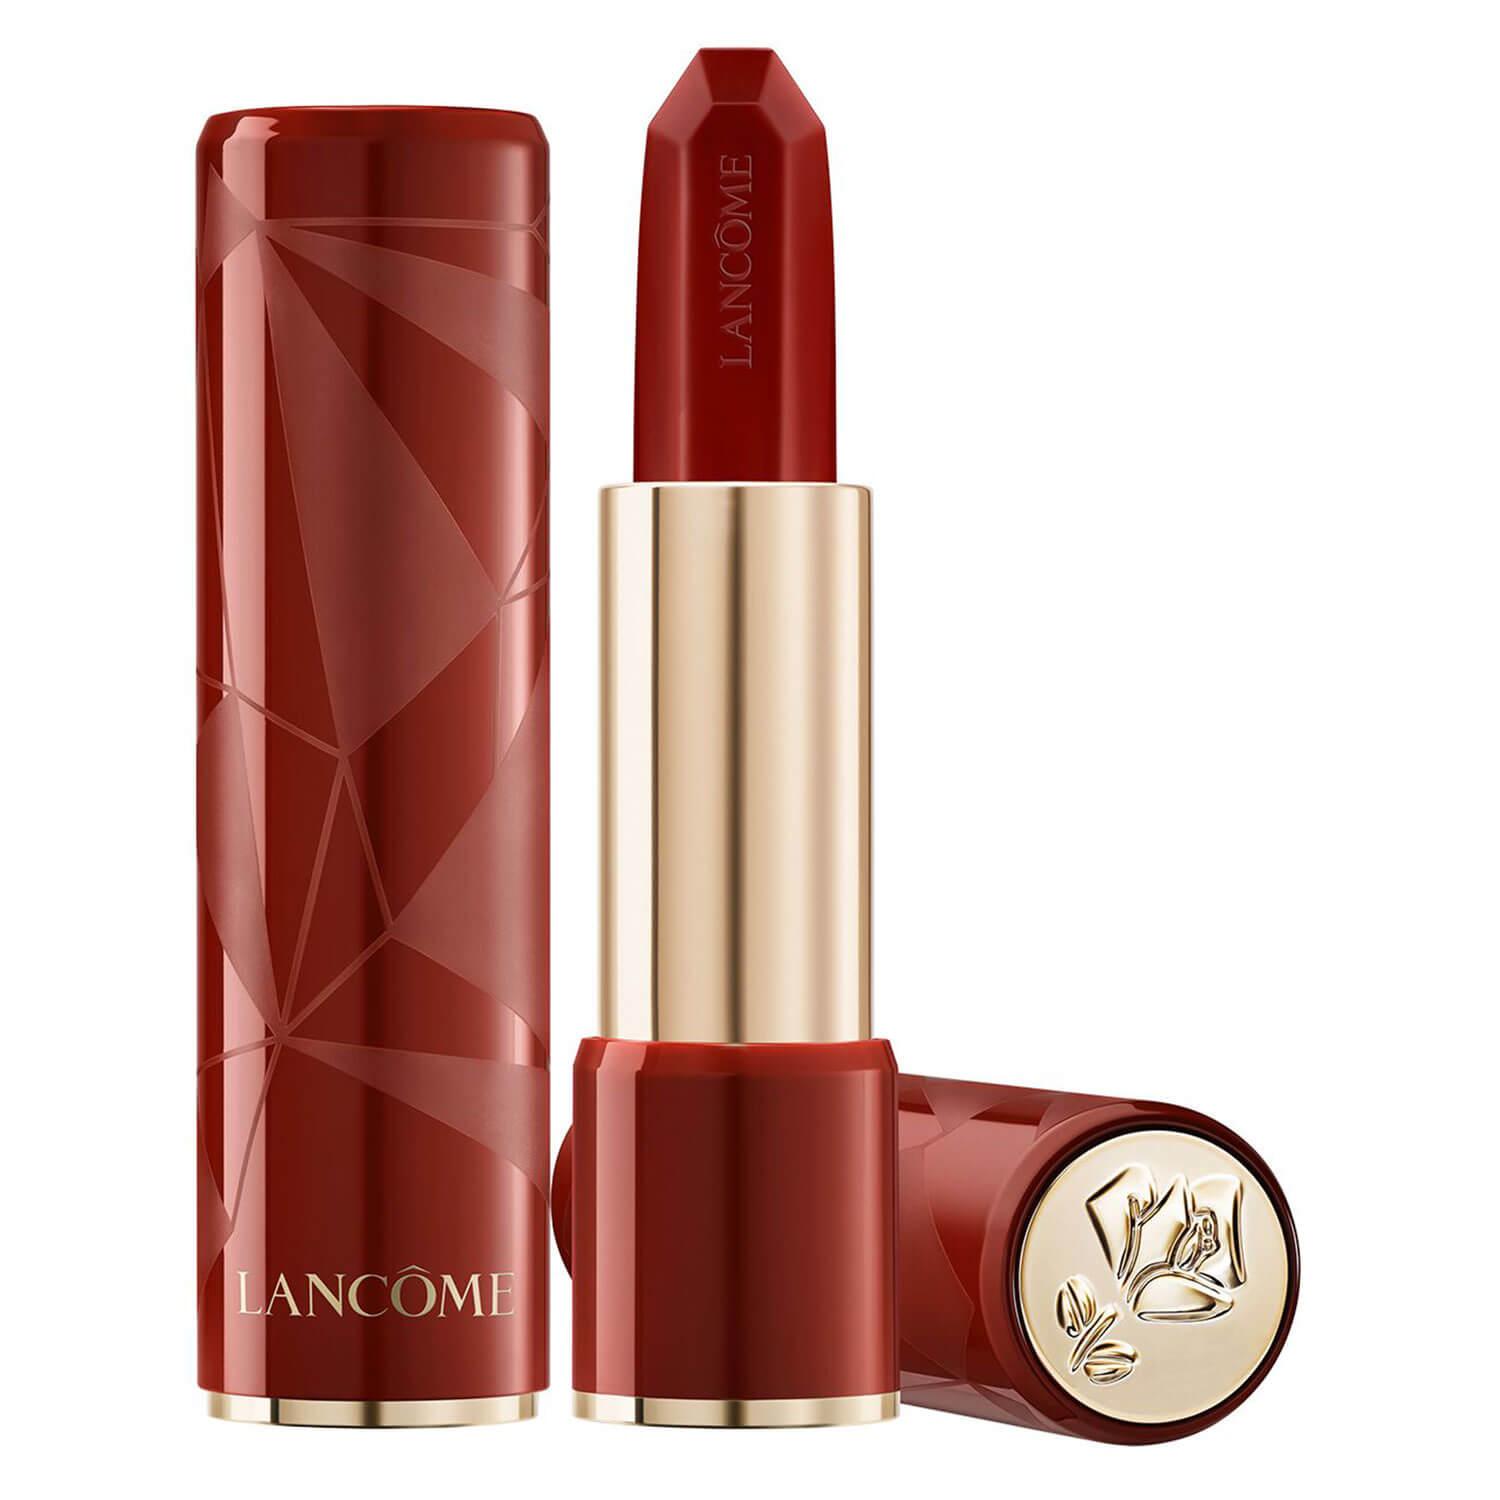 L'Absolu Rouge Ruby Cream - Bad Blood Ruby 01 Limited Edition